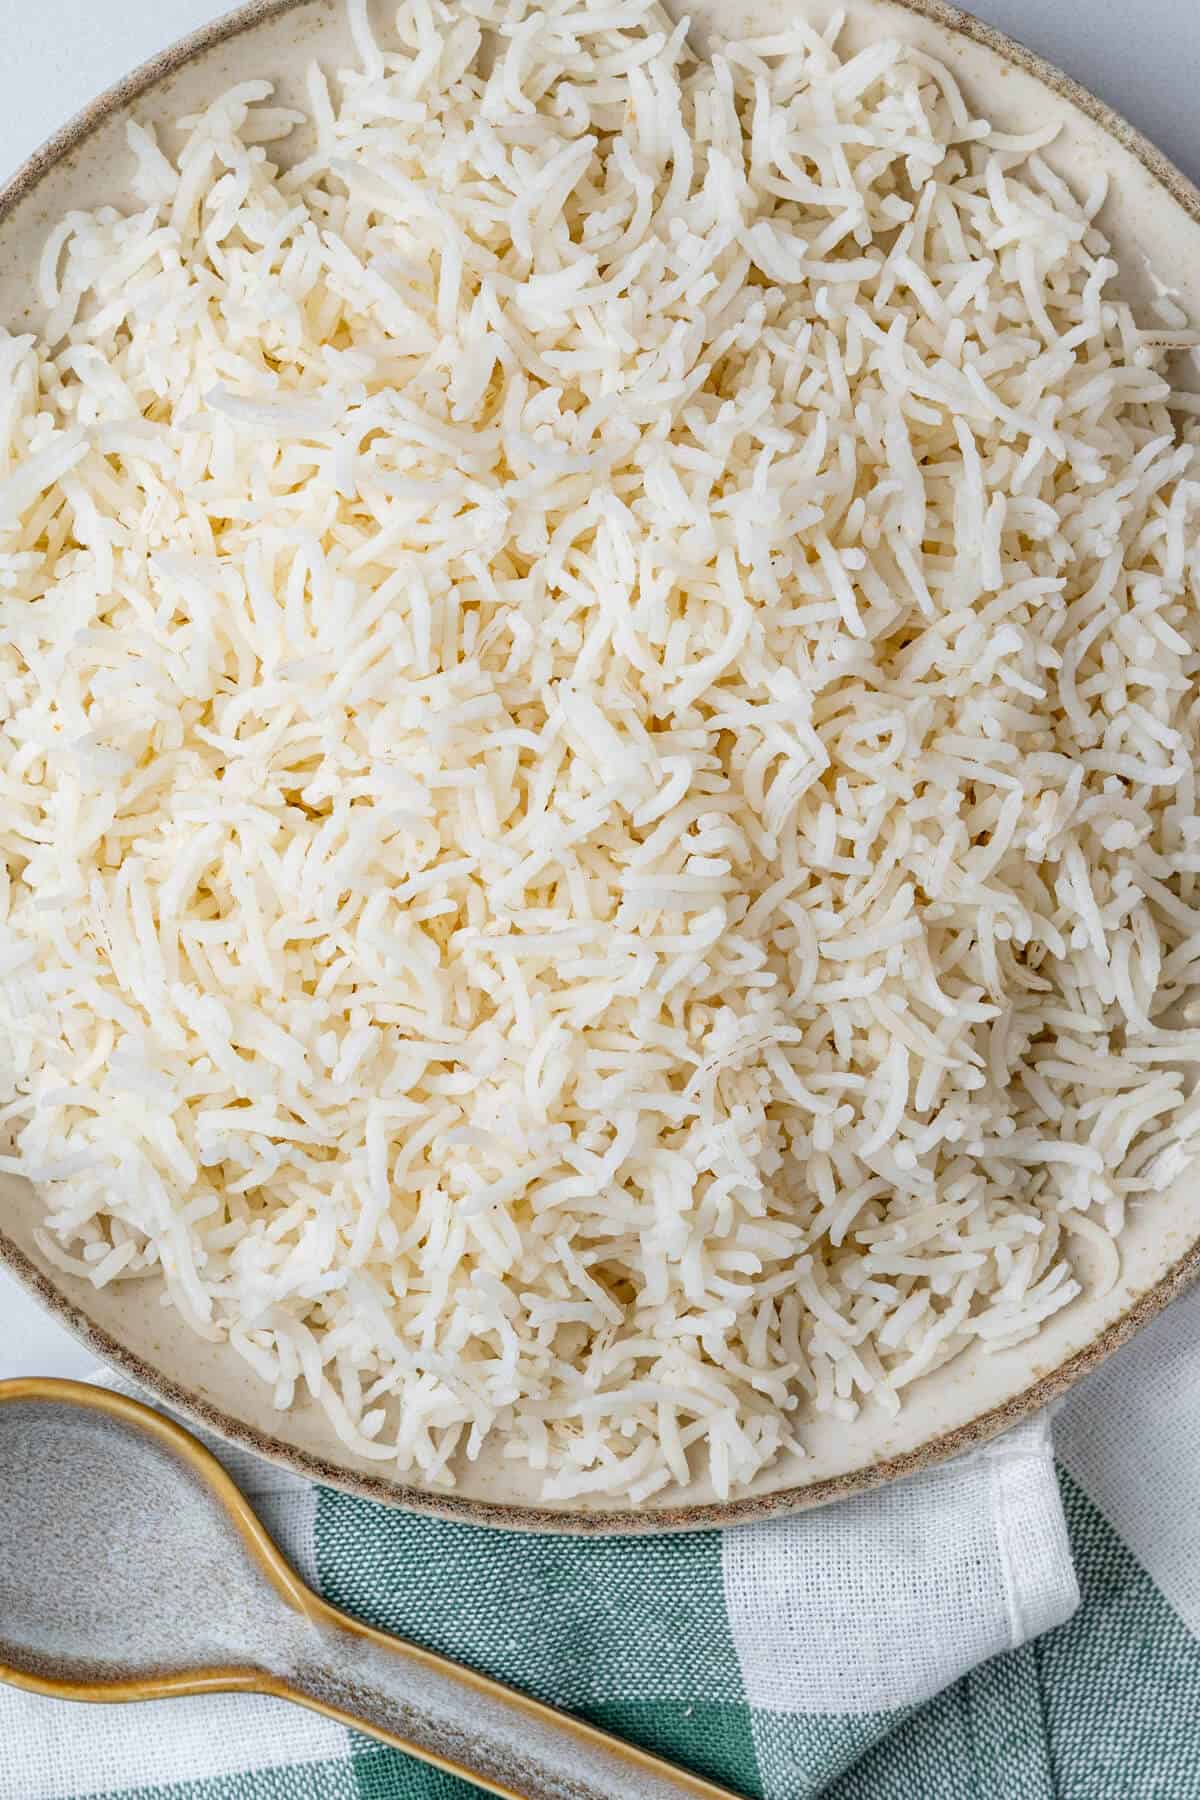 Basmati rice in a large plate with a spoon